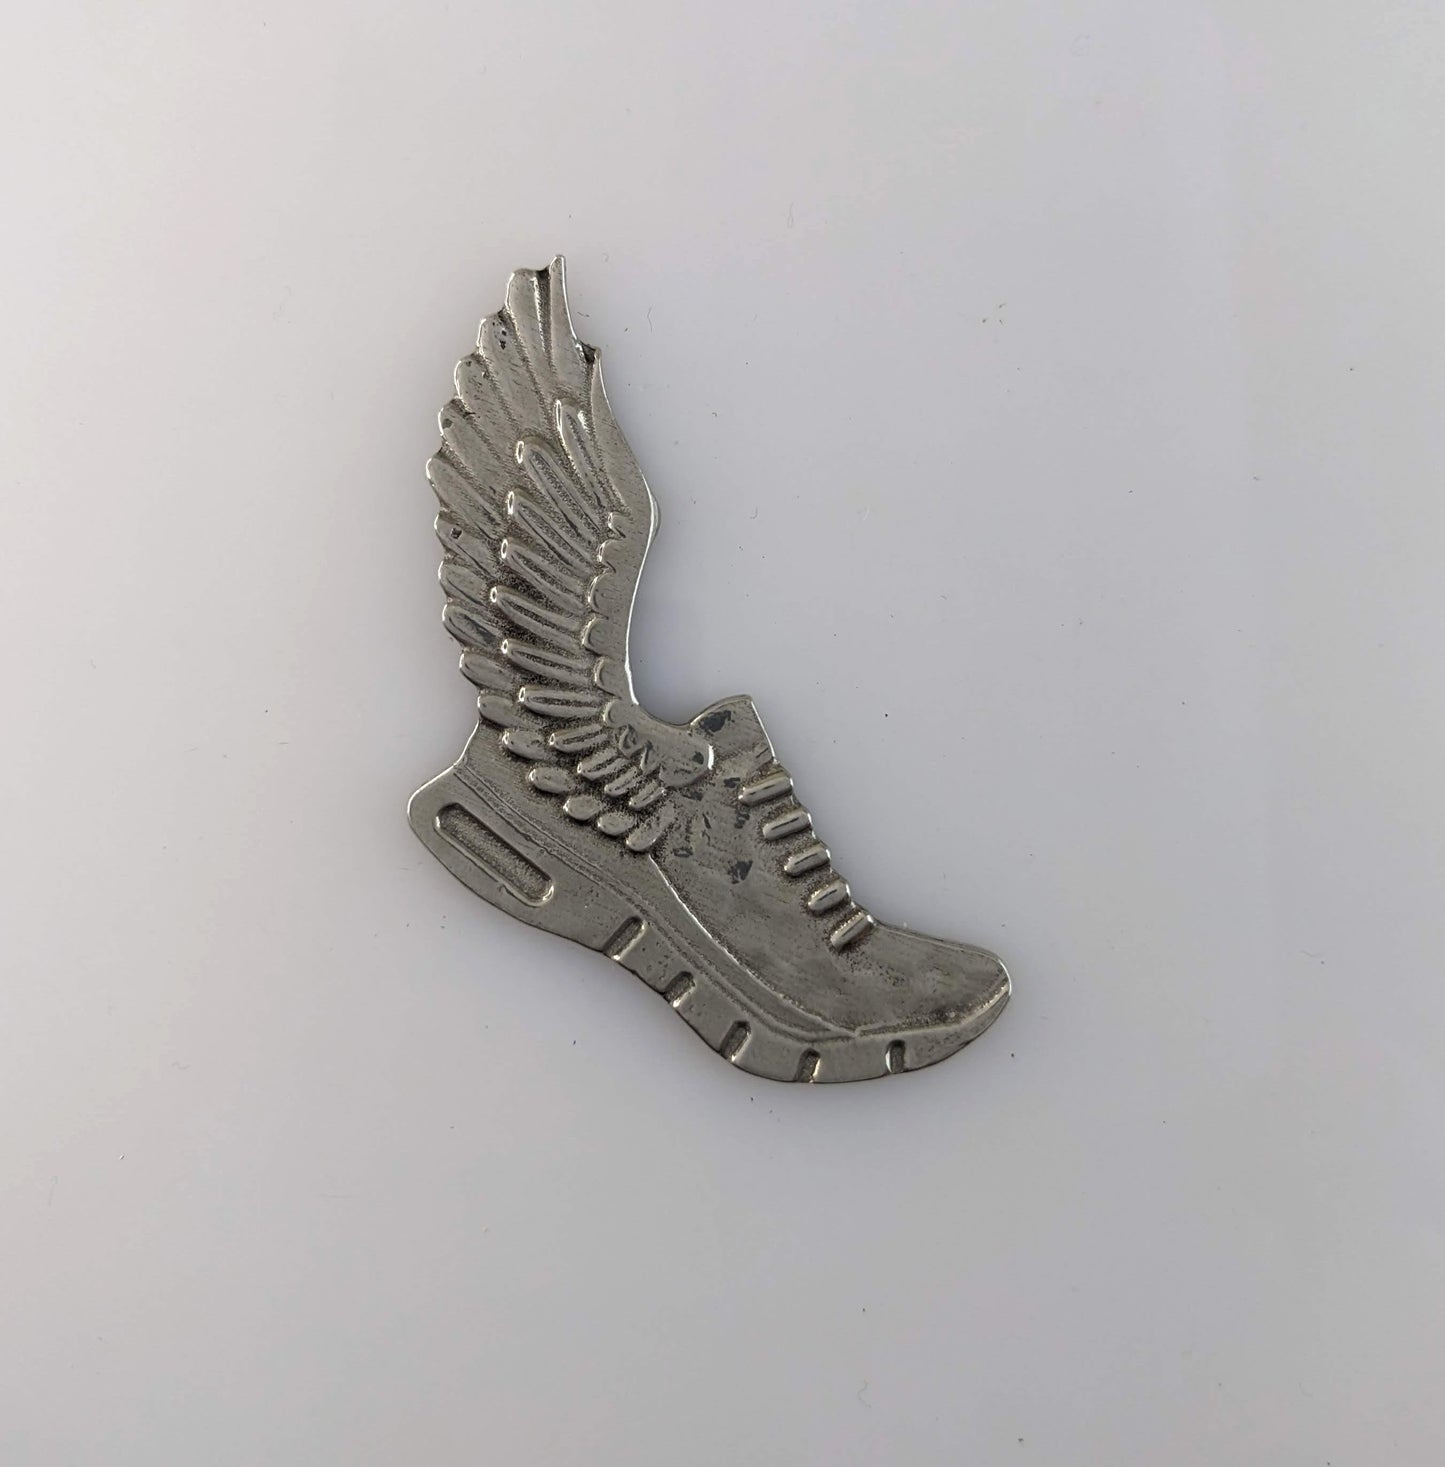 Winged Foot pewter magnet